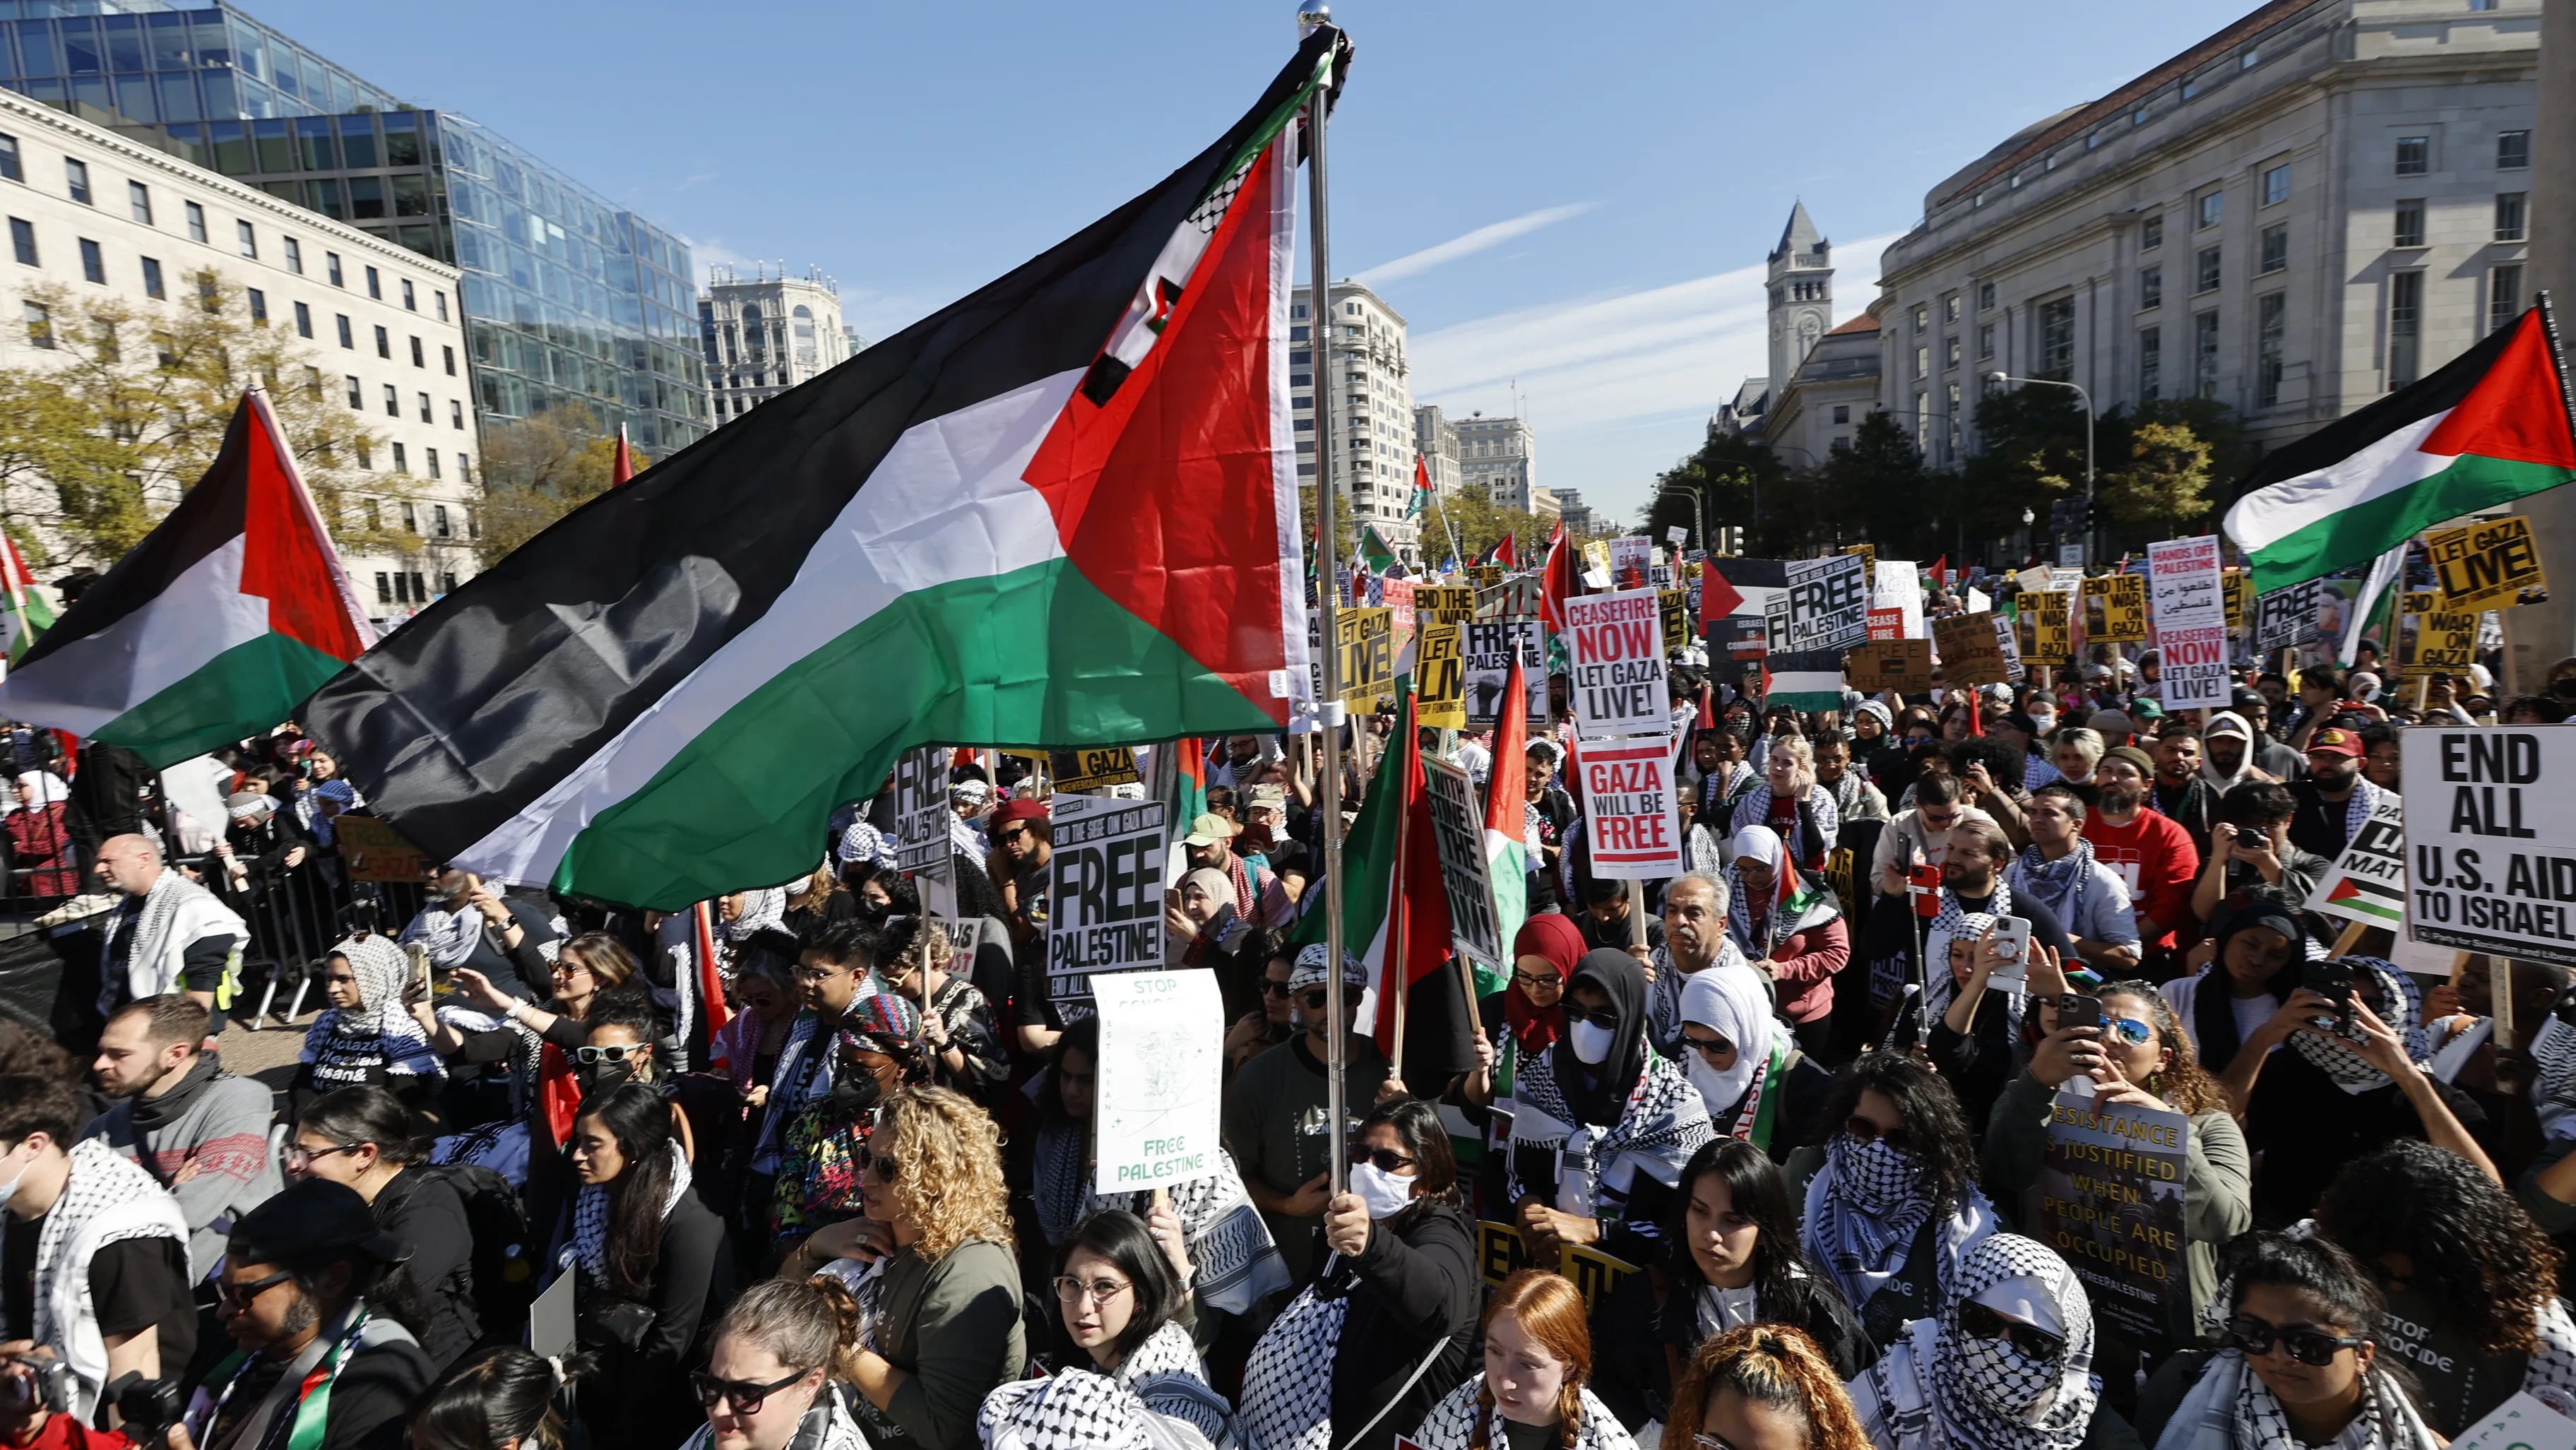 Thousands Of Protesters Gather In US As Israel Continuously Bombs Gaza For Almost A Month